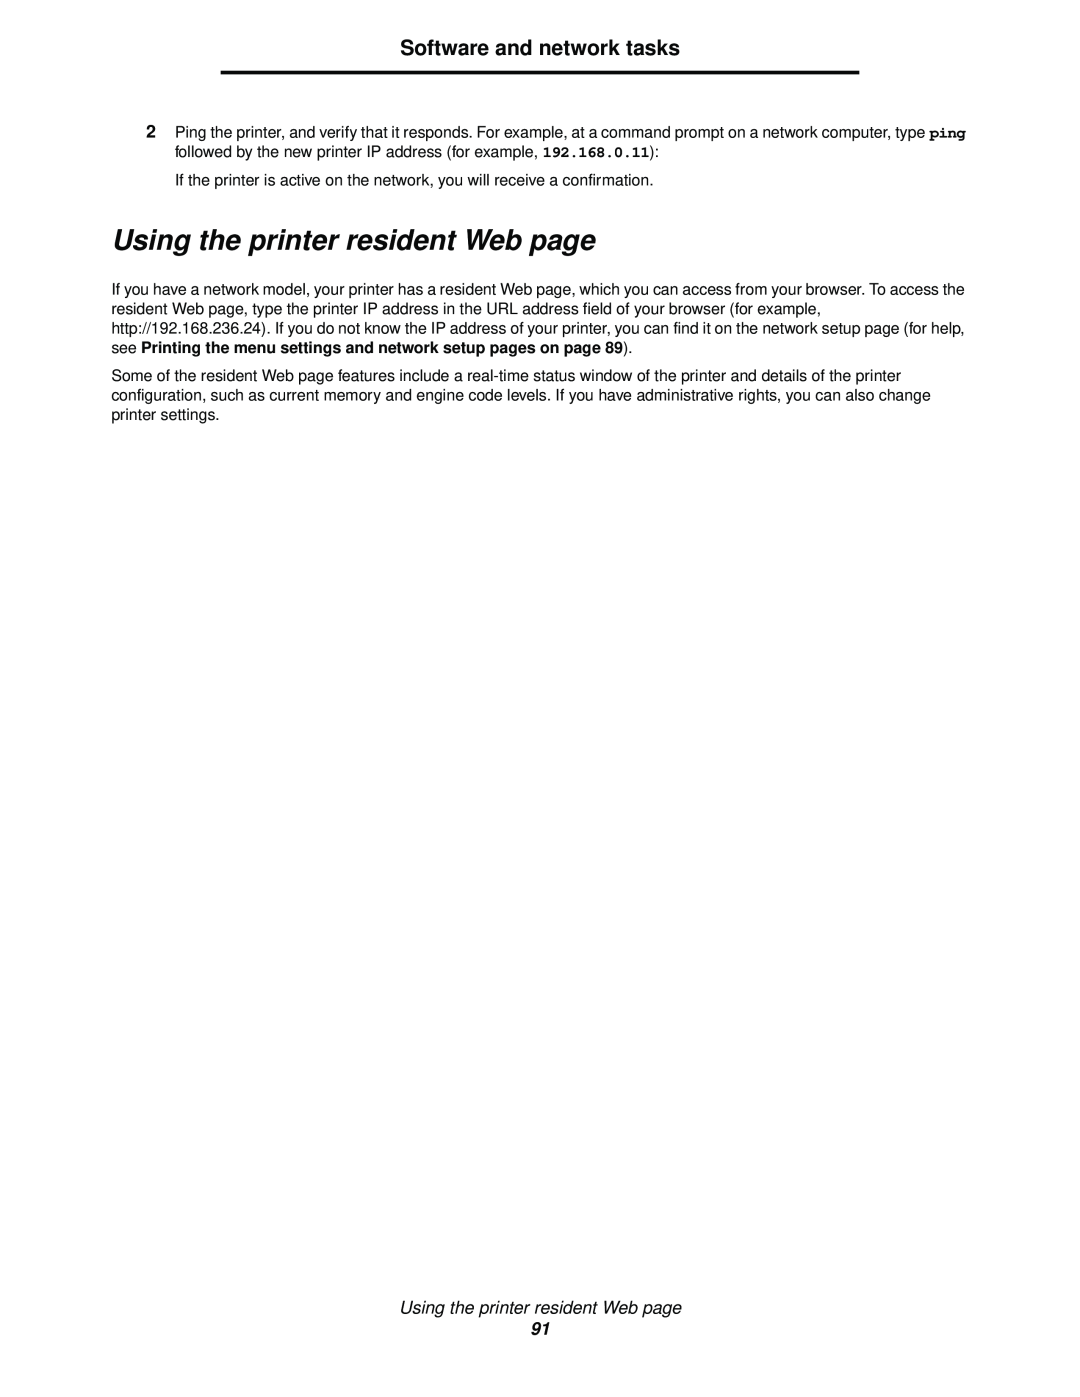 Lexmark 340, 342n manual Using the printer resident Web page, Software and network tasks 